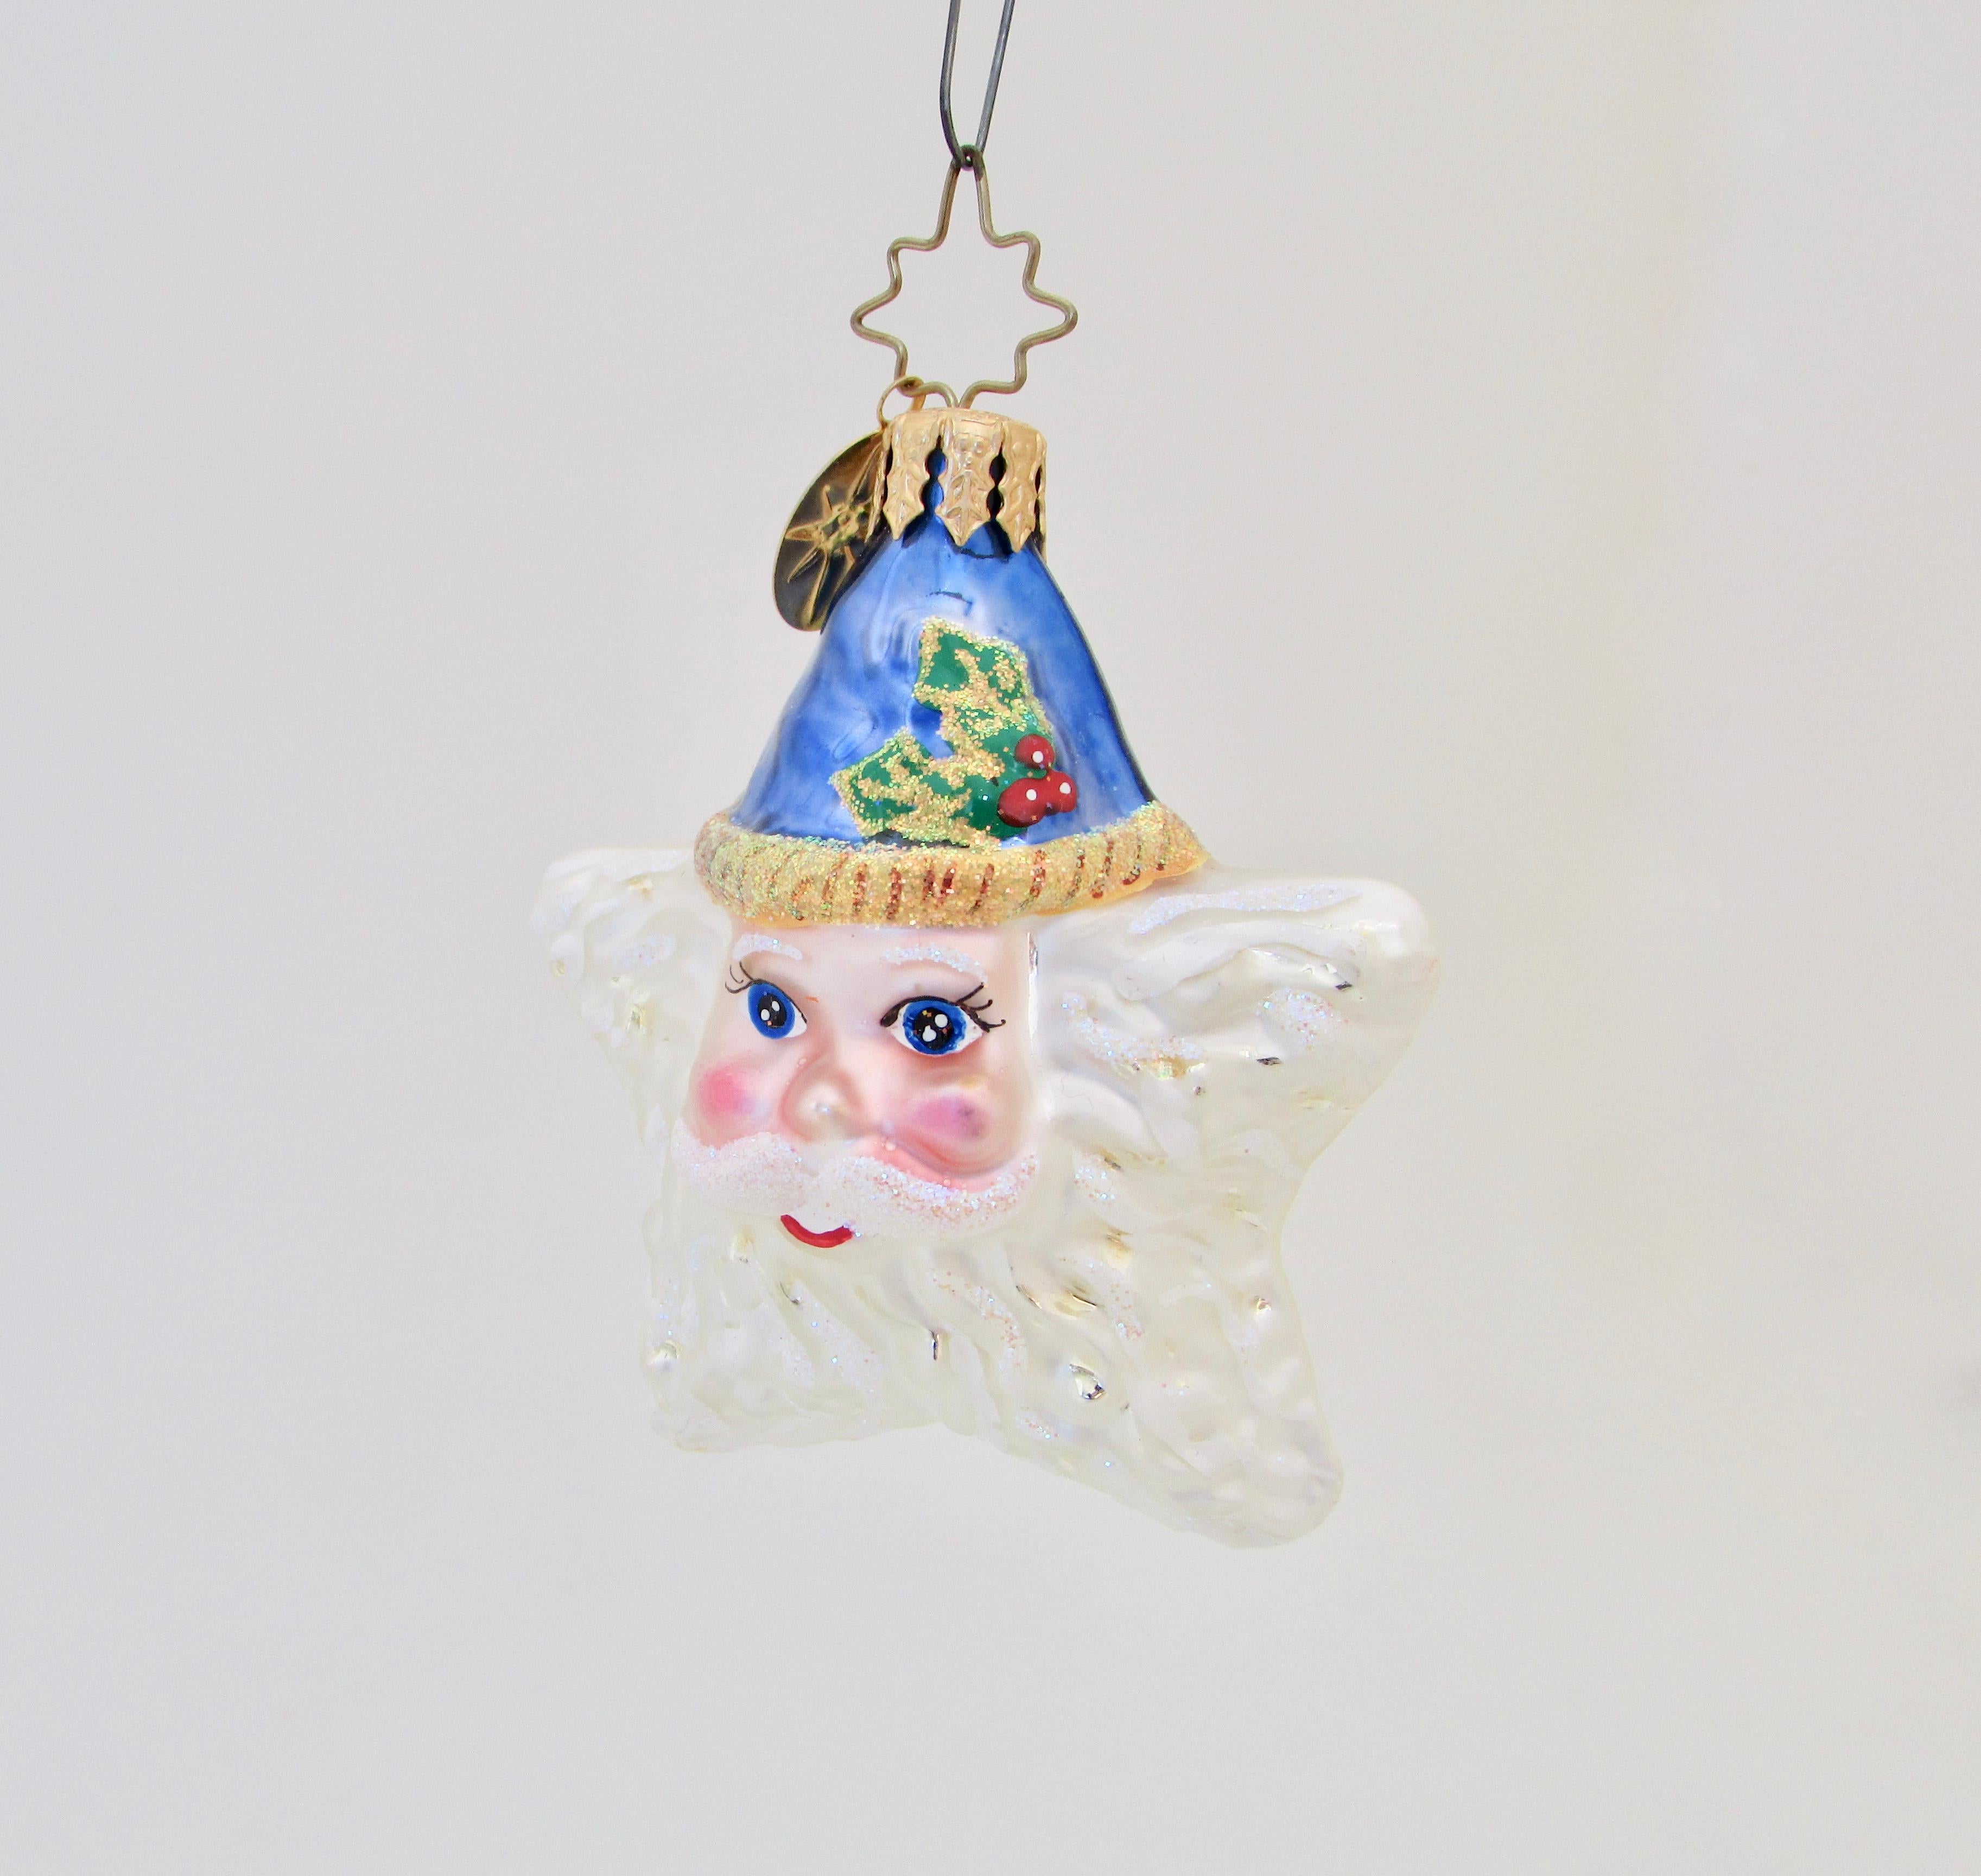 Vintage Christopher Radko double-sided Christmas ornament Shine On Santa shaped as a star with full white beard and holly adorned blue hat. Flocked throughout.   

Family-owned European factories use centuries-old techniques to blow, silver,